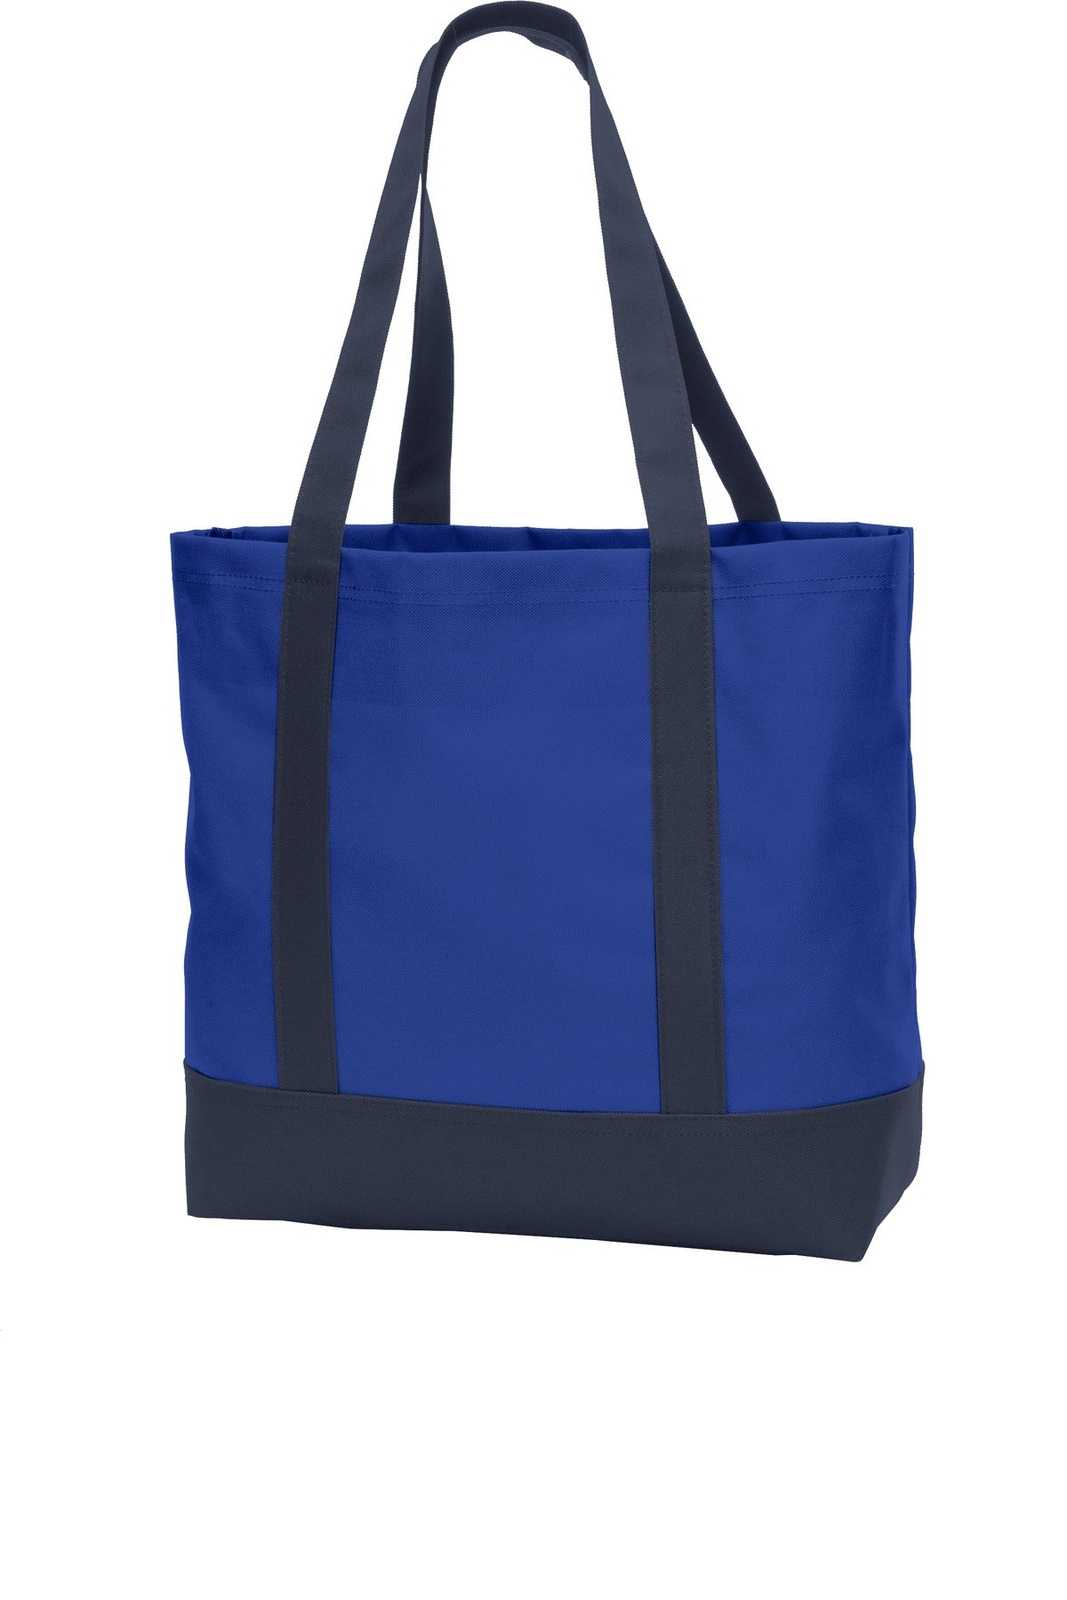 Port Authority BG406 Day Tote - Twilight Blue Navy - HIT a Double - 1